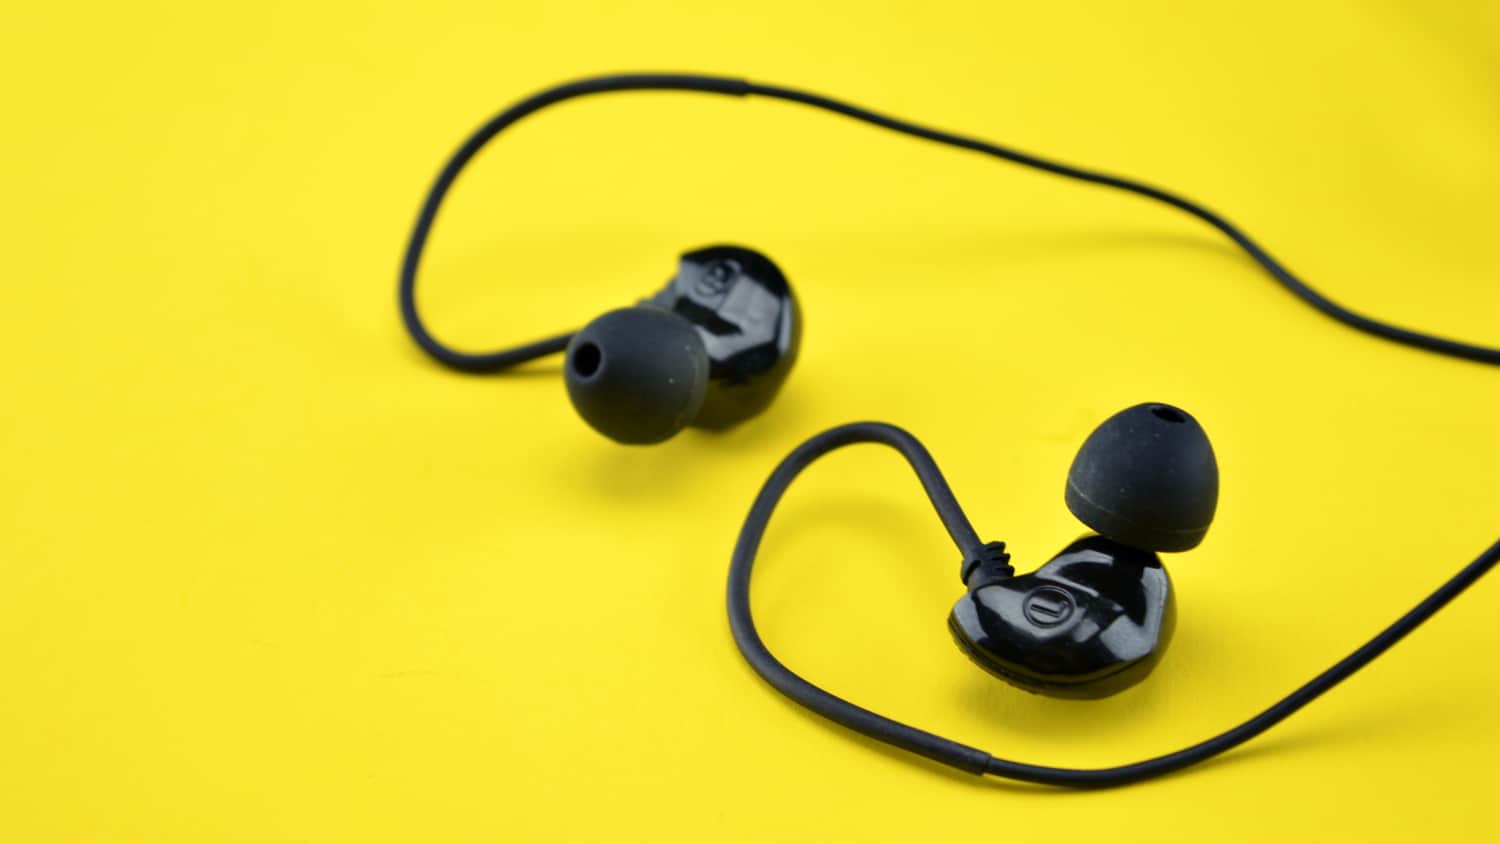 The Brainwavz Audio B200 earbuds are some of the best around, even with a few compromises.